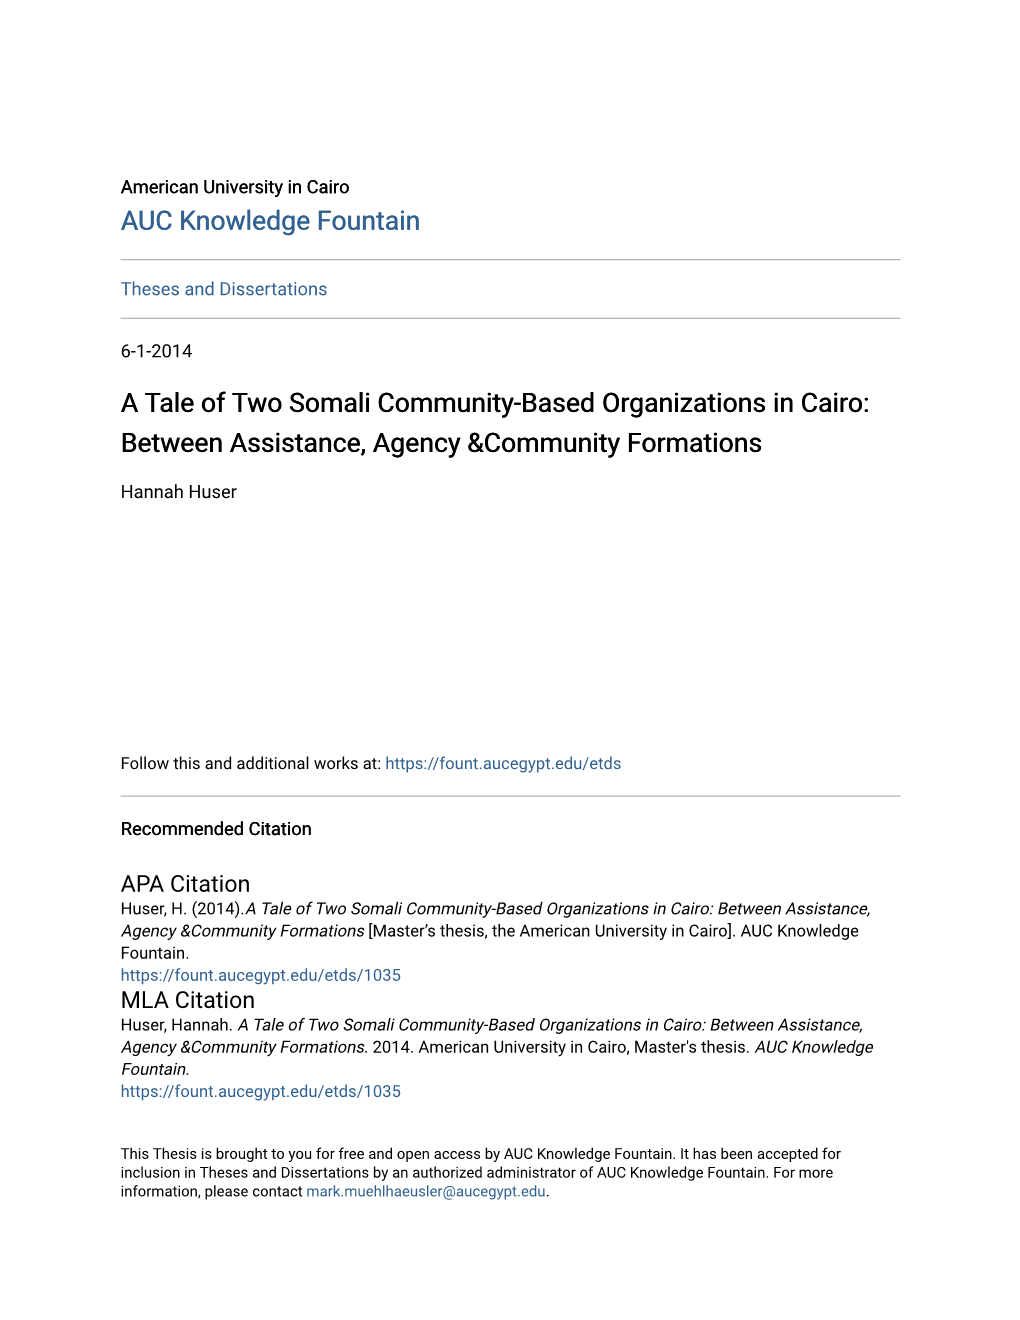 A Tale of Two Somali Community-Based Organizations in Cairo: Between Assistance, Agency &Community Formations